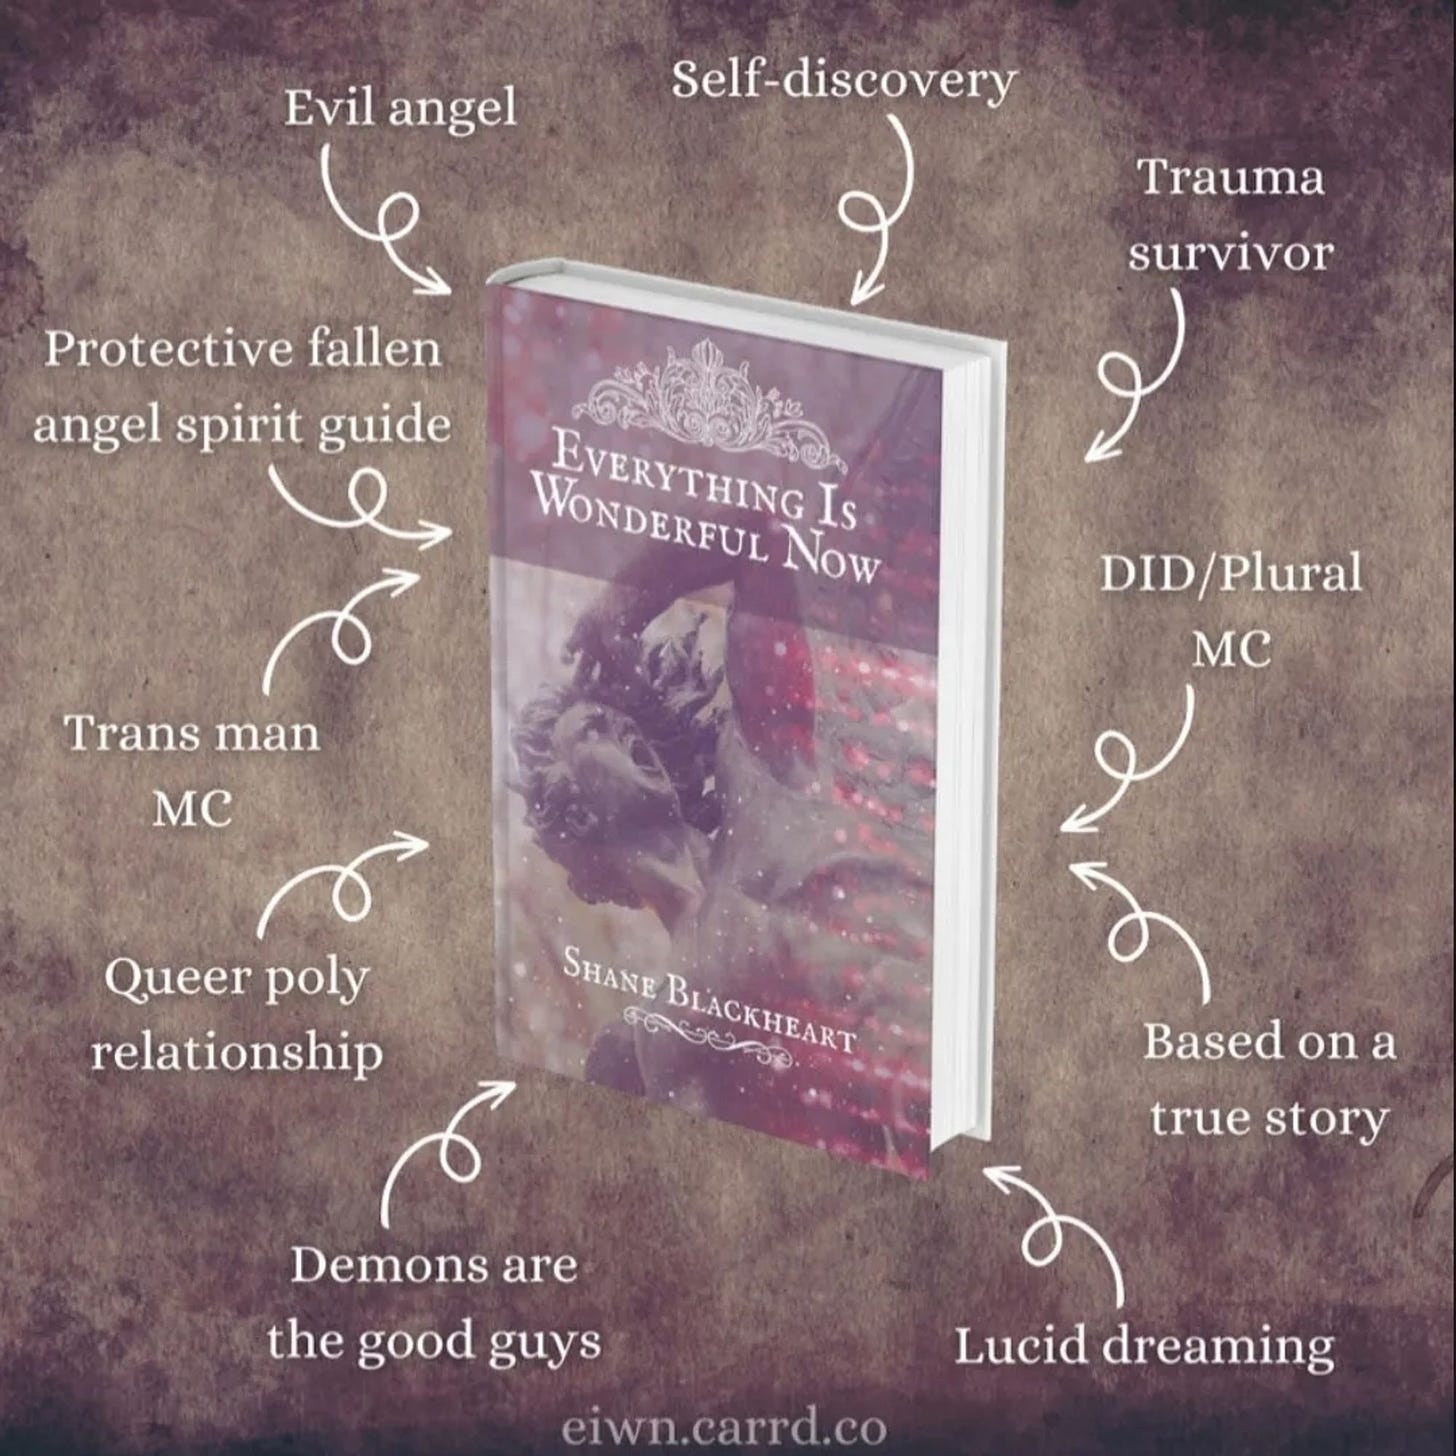 The cover of the book with tropes surrounding it. The text reads: self-discovery, trauma survivor, DID/Plural MC, Based on a true story, lucid dreaming, demons are the good guys, queer poly relationship, trans man MC, protective fallen angel spirit guide, evil angel.